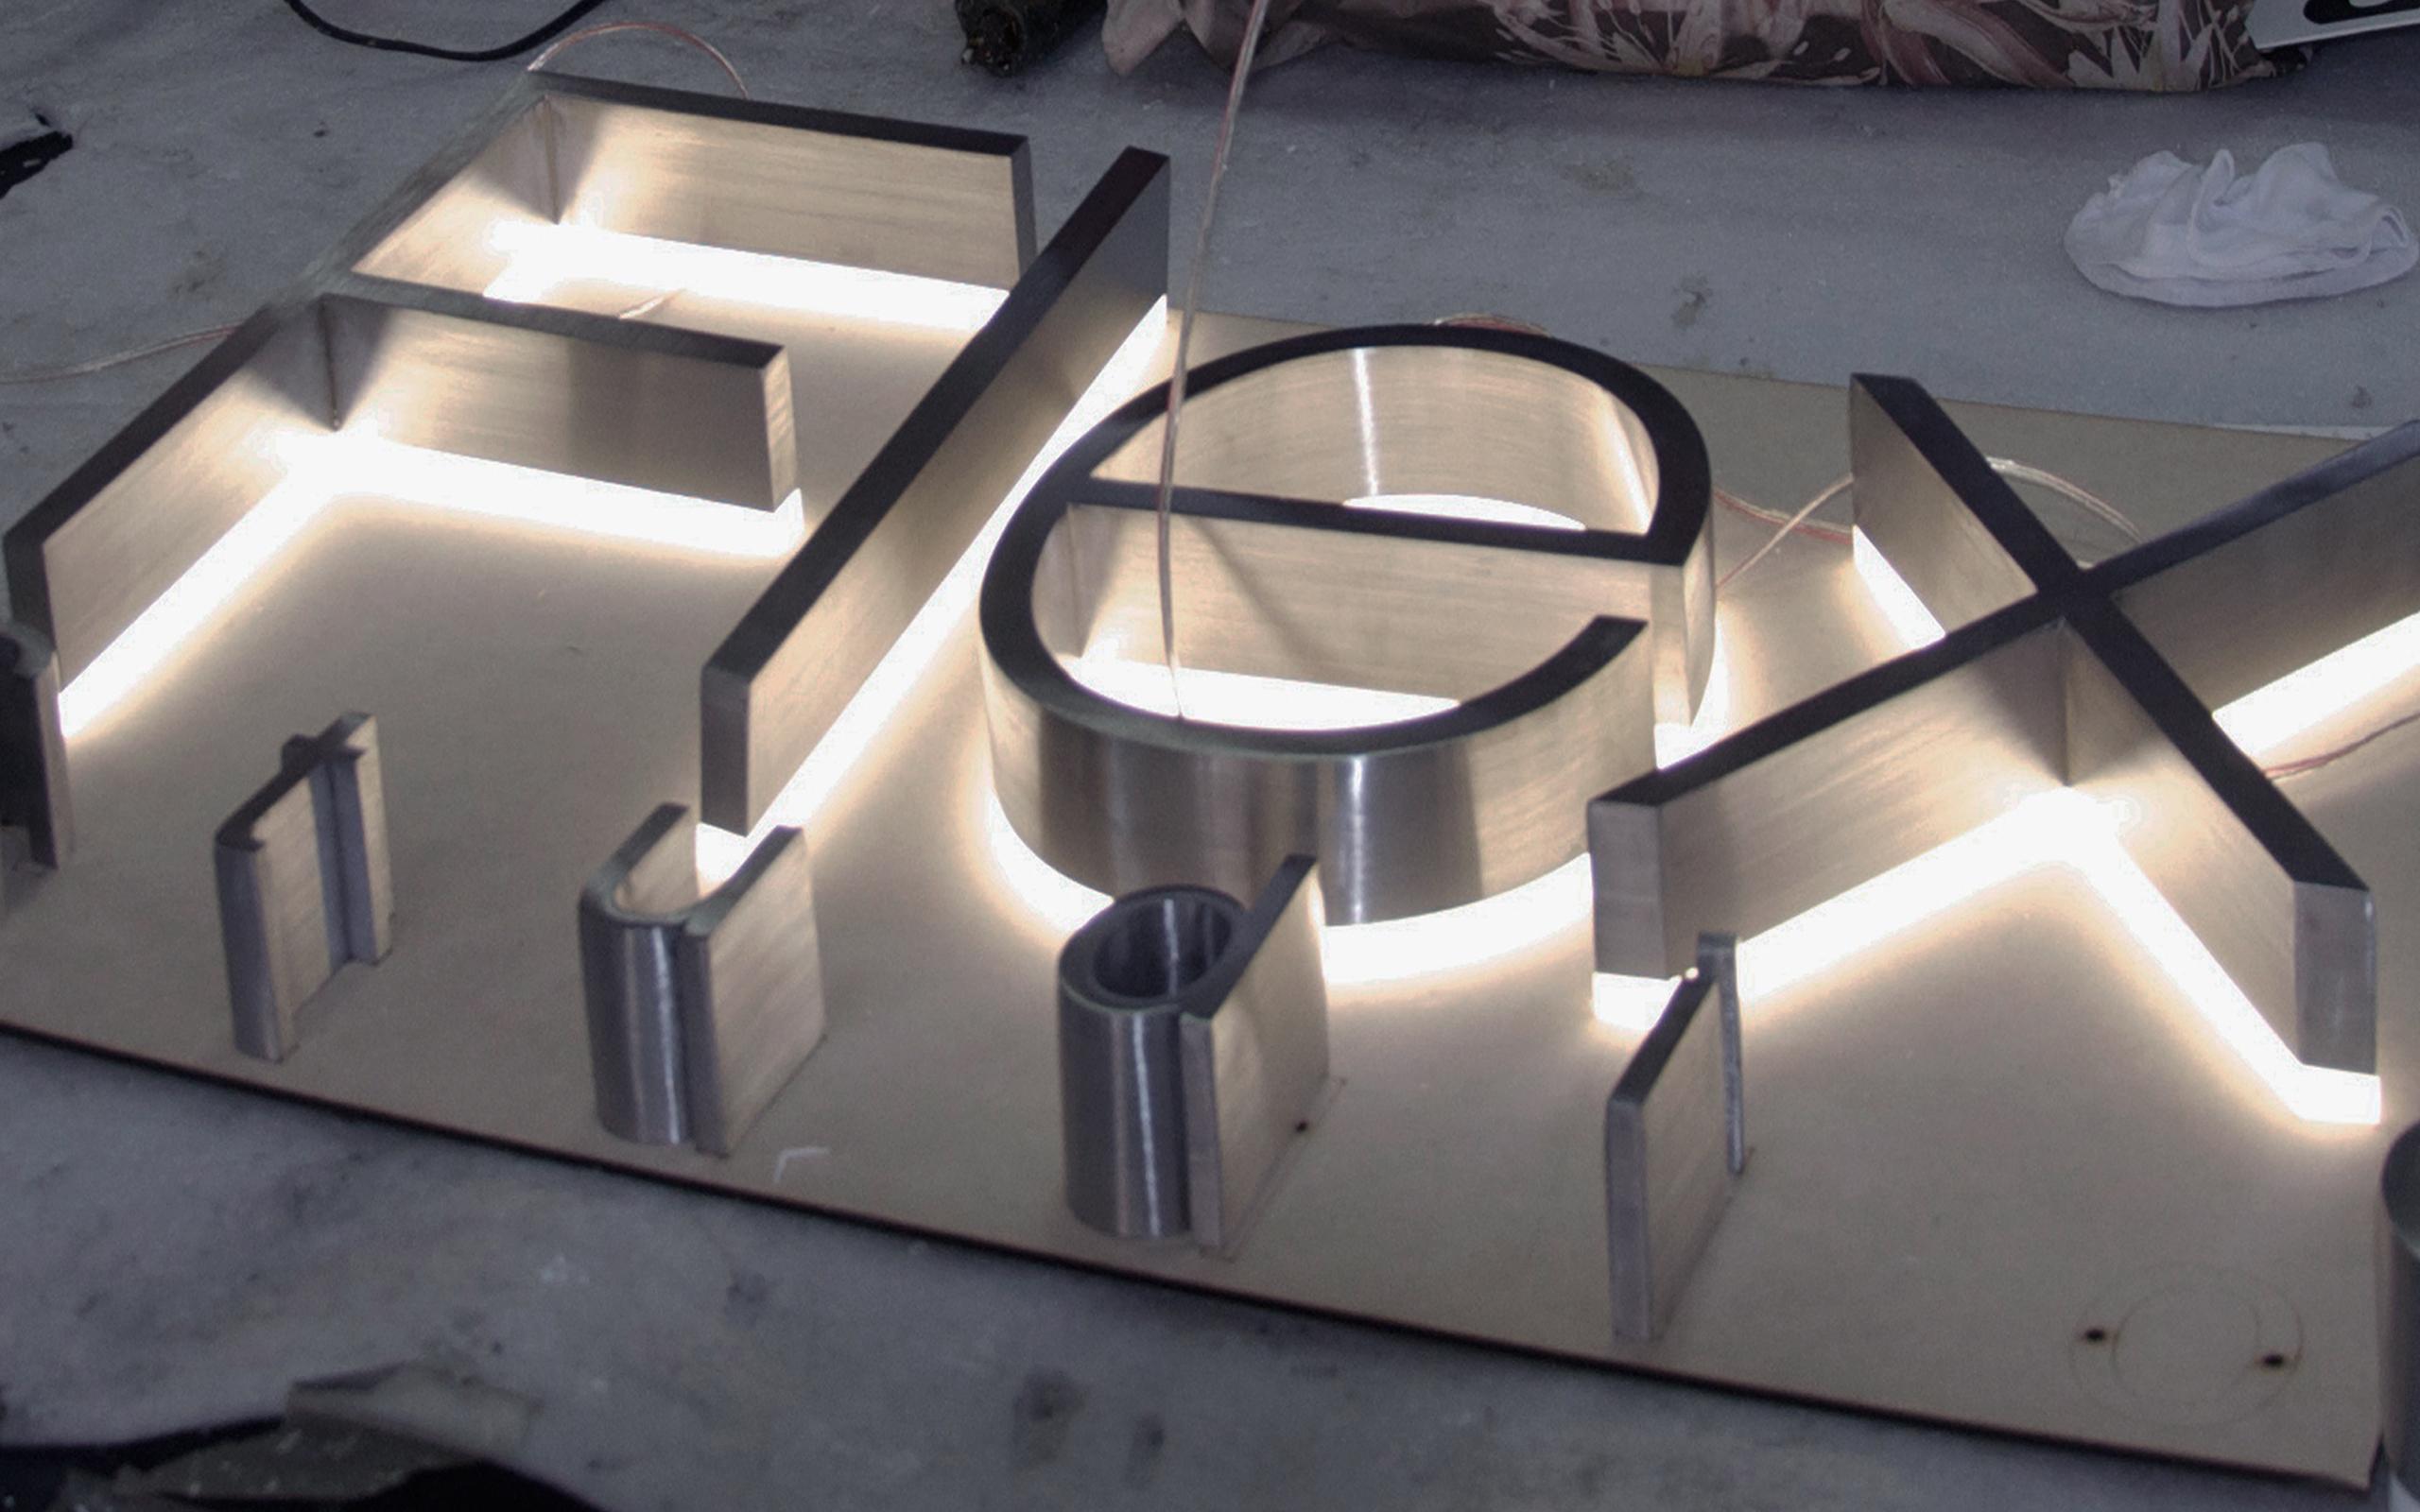 thick-fabricated-stainless-steel-signage-with-back-lit-illumination